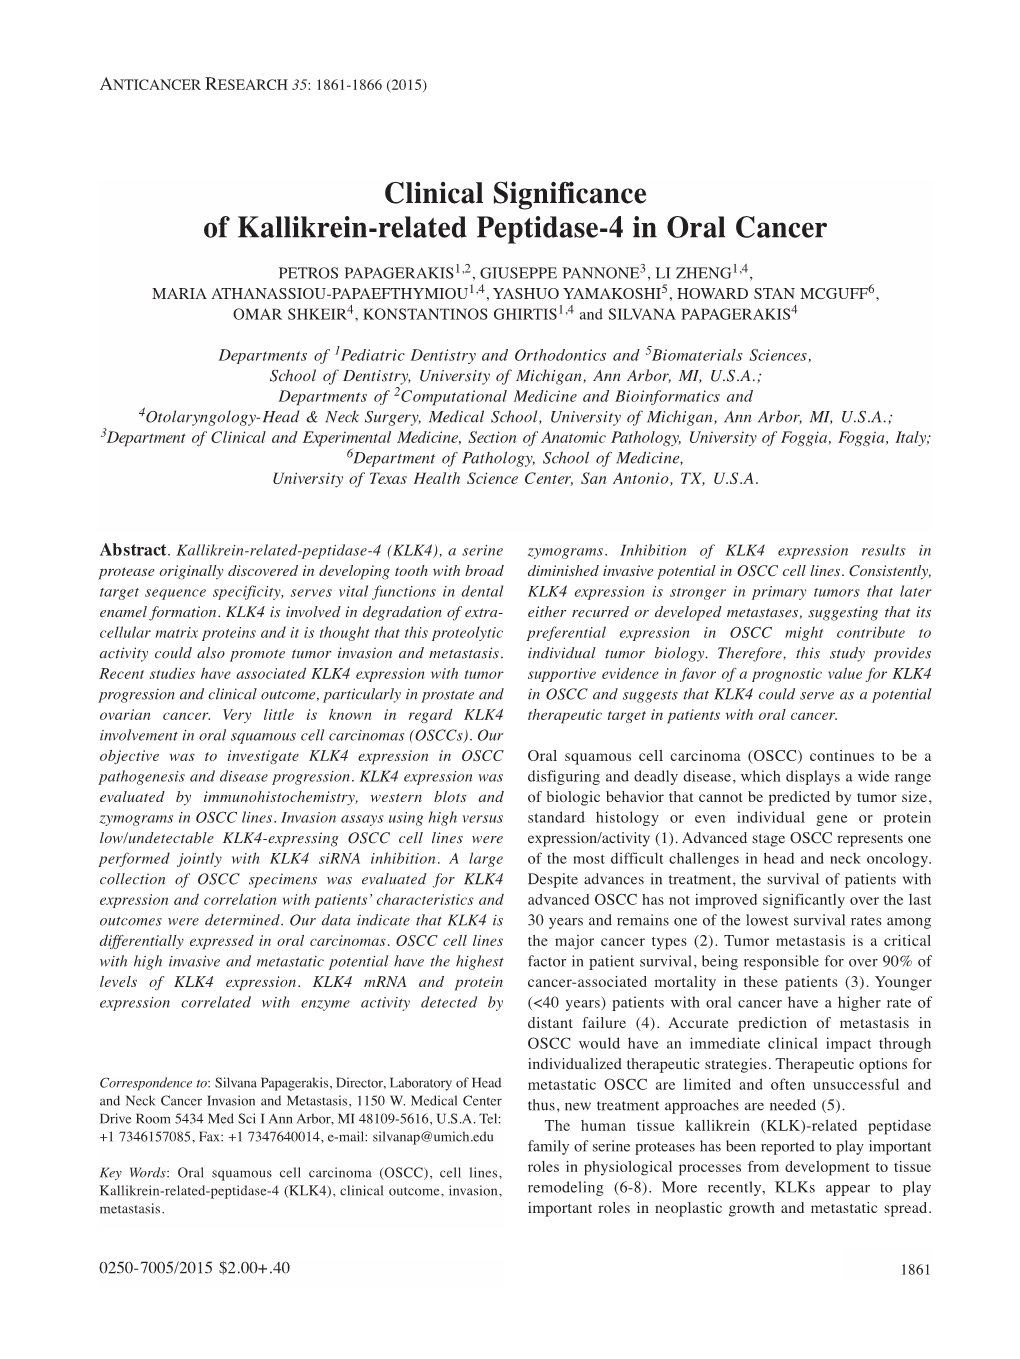 Clinical Significance of Kallikrein-Related Peptidase-4 in Oral Cancer